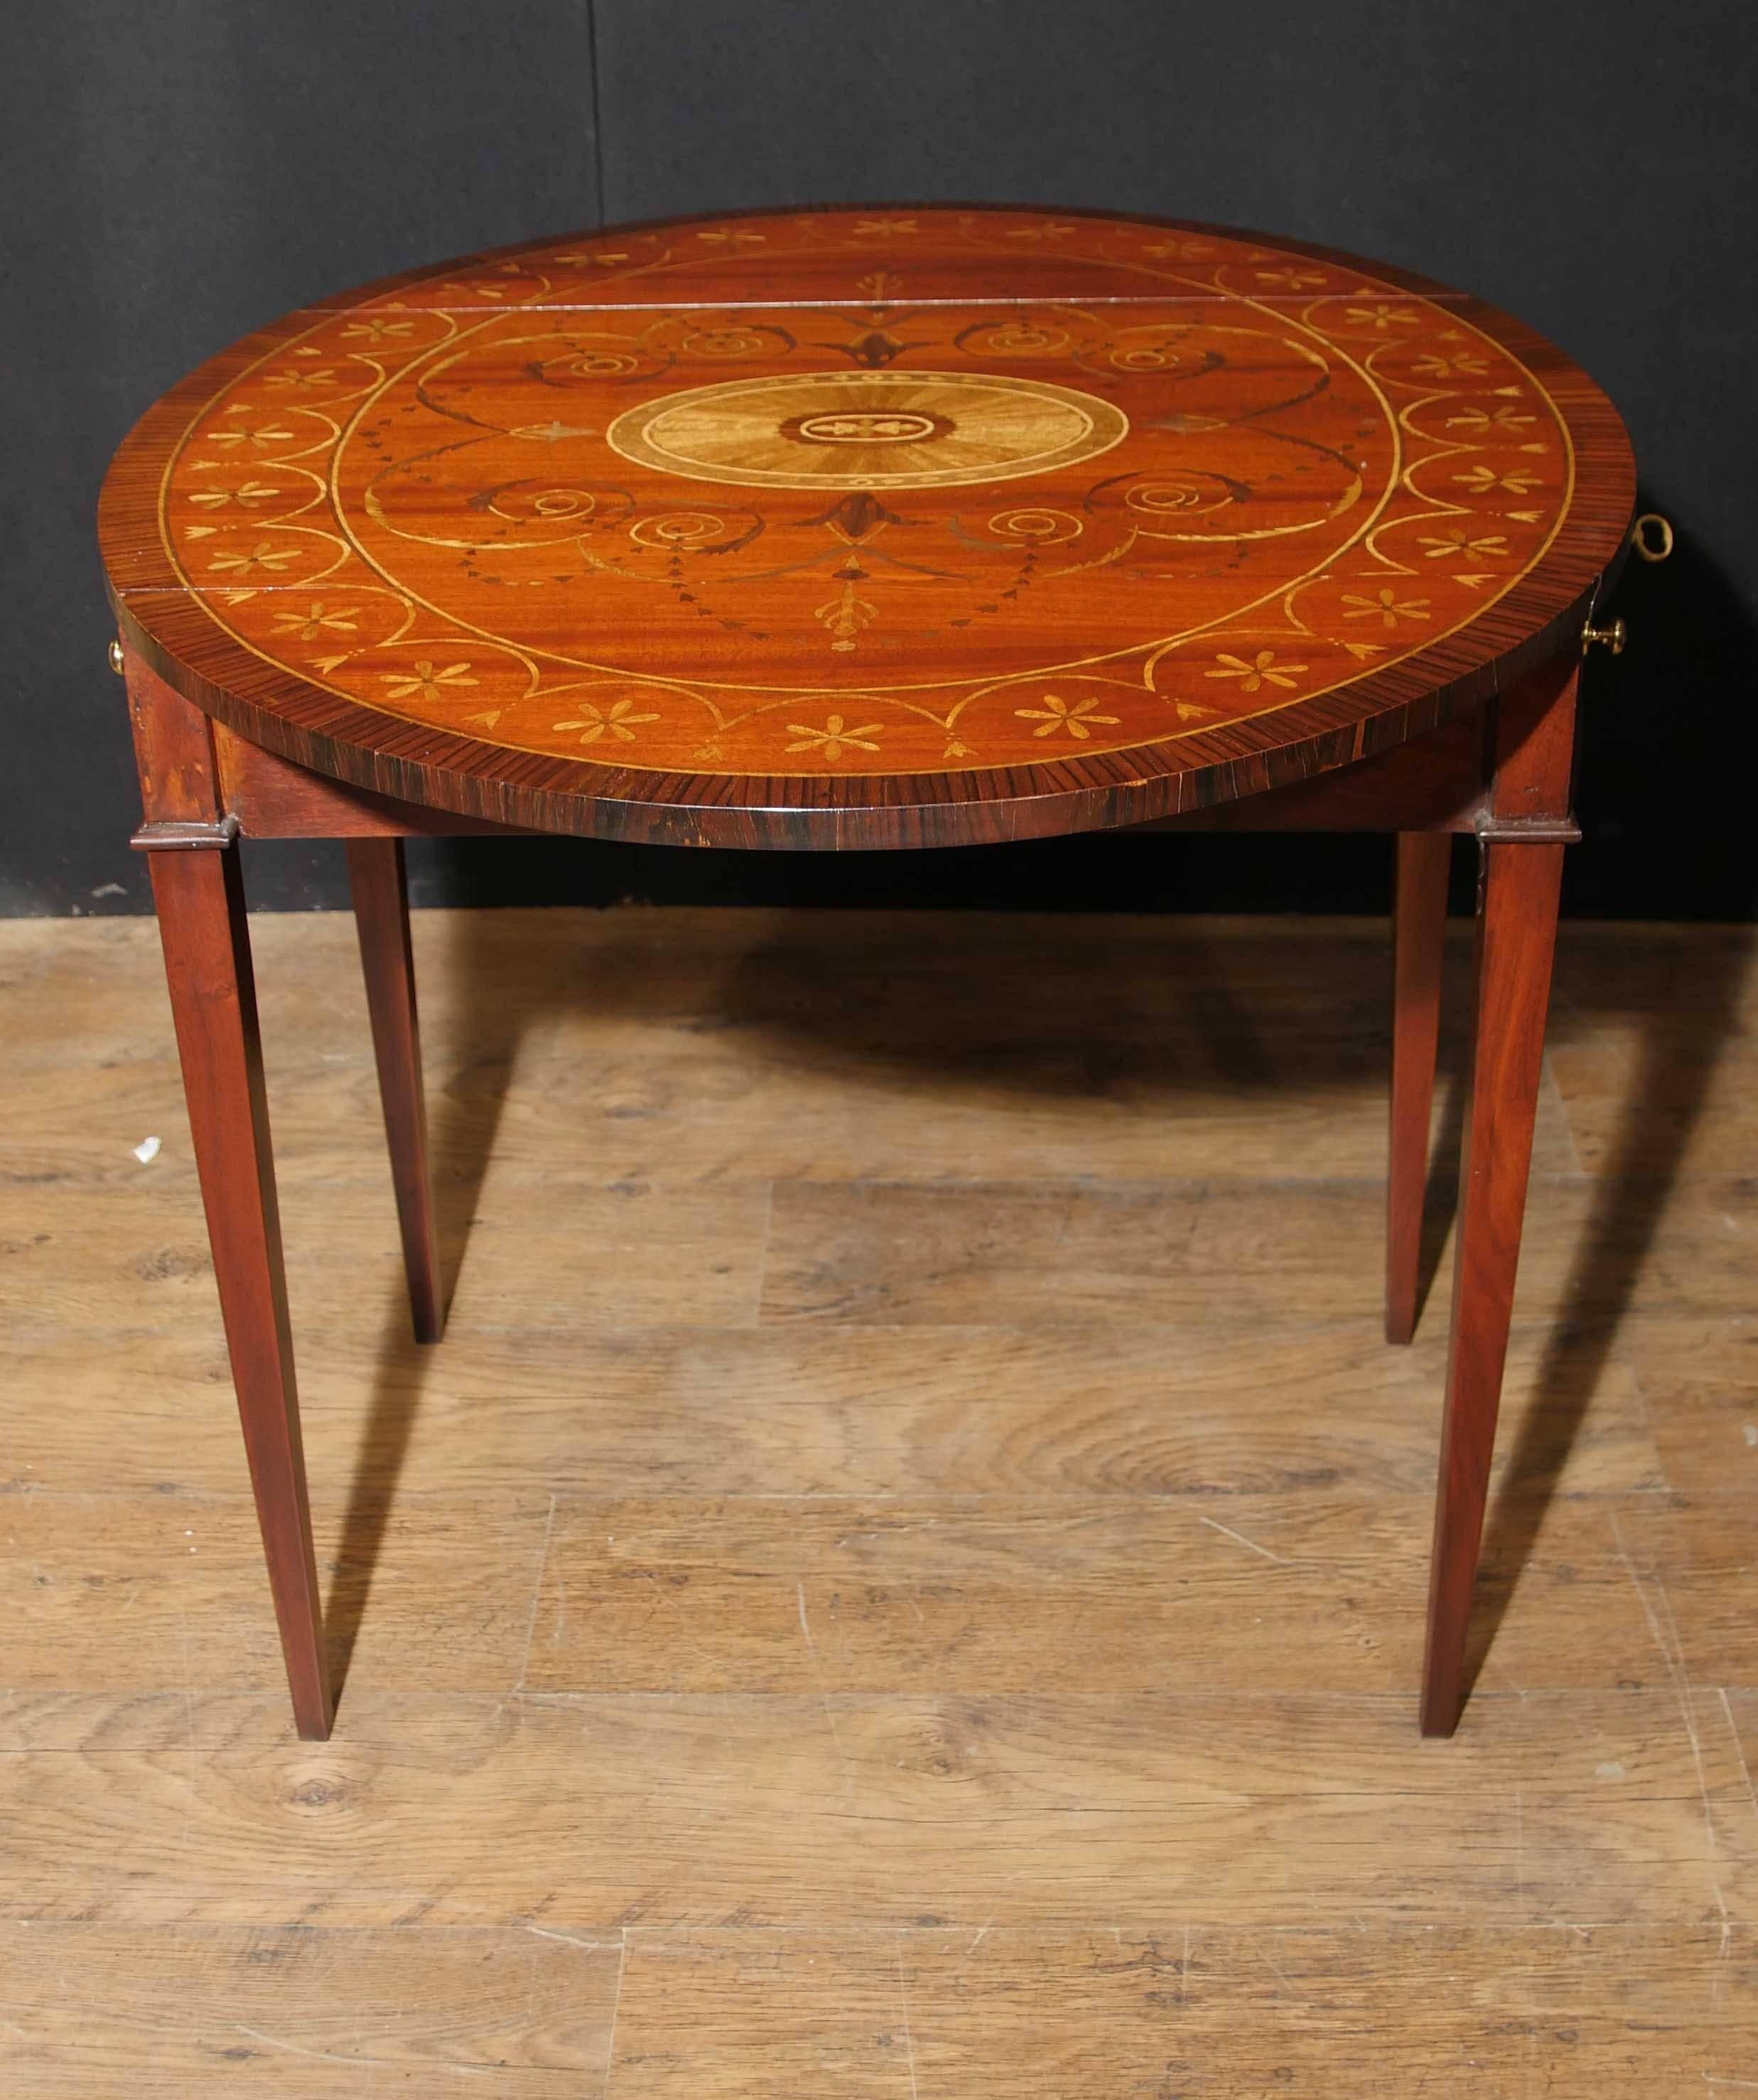 Gorgeous Sheraton style Pembroke or drop leaf table in mahogany and rosewood.
Profusely inlaid with exotic wood in marquetry with symmetrical patterns.
The Pembroke table was named for the Earl and Countess of Pembroke who first commissioned this